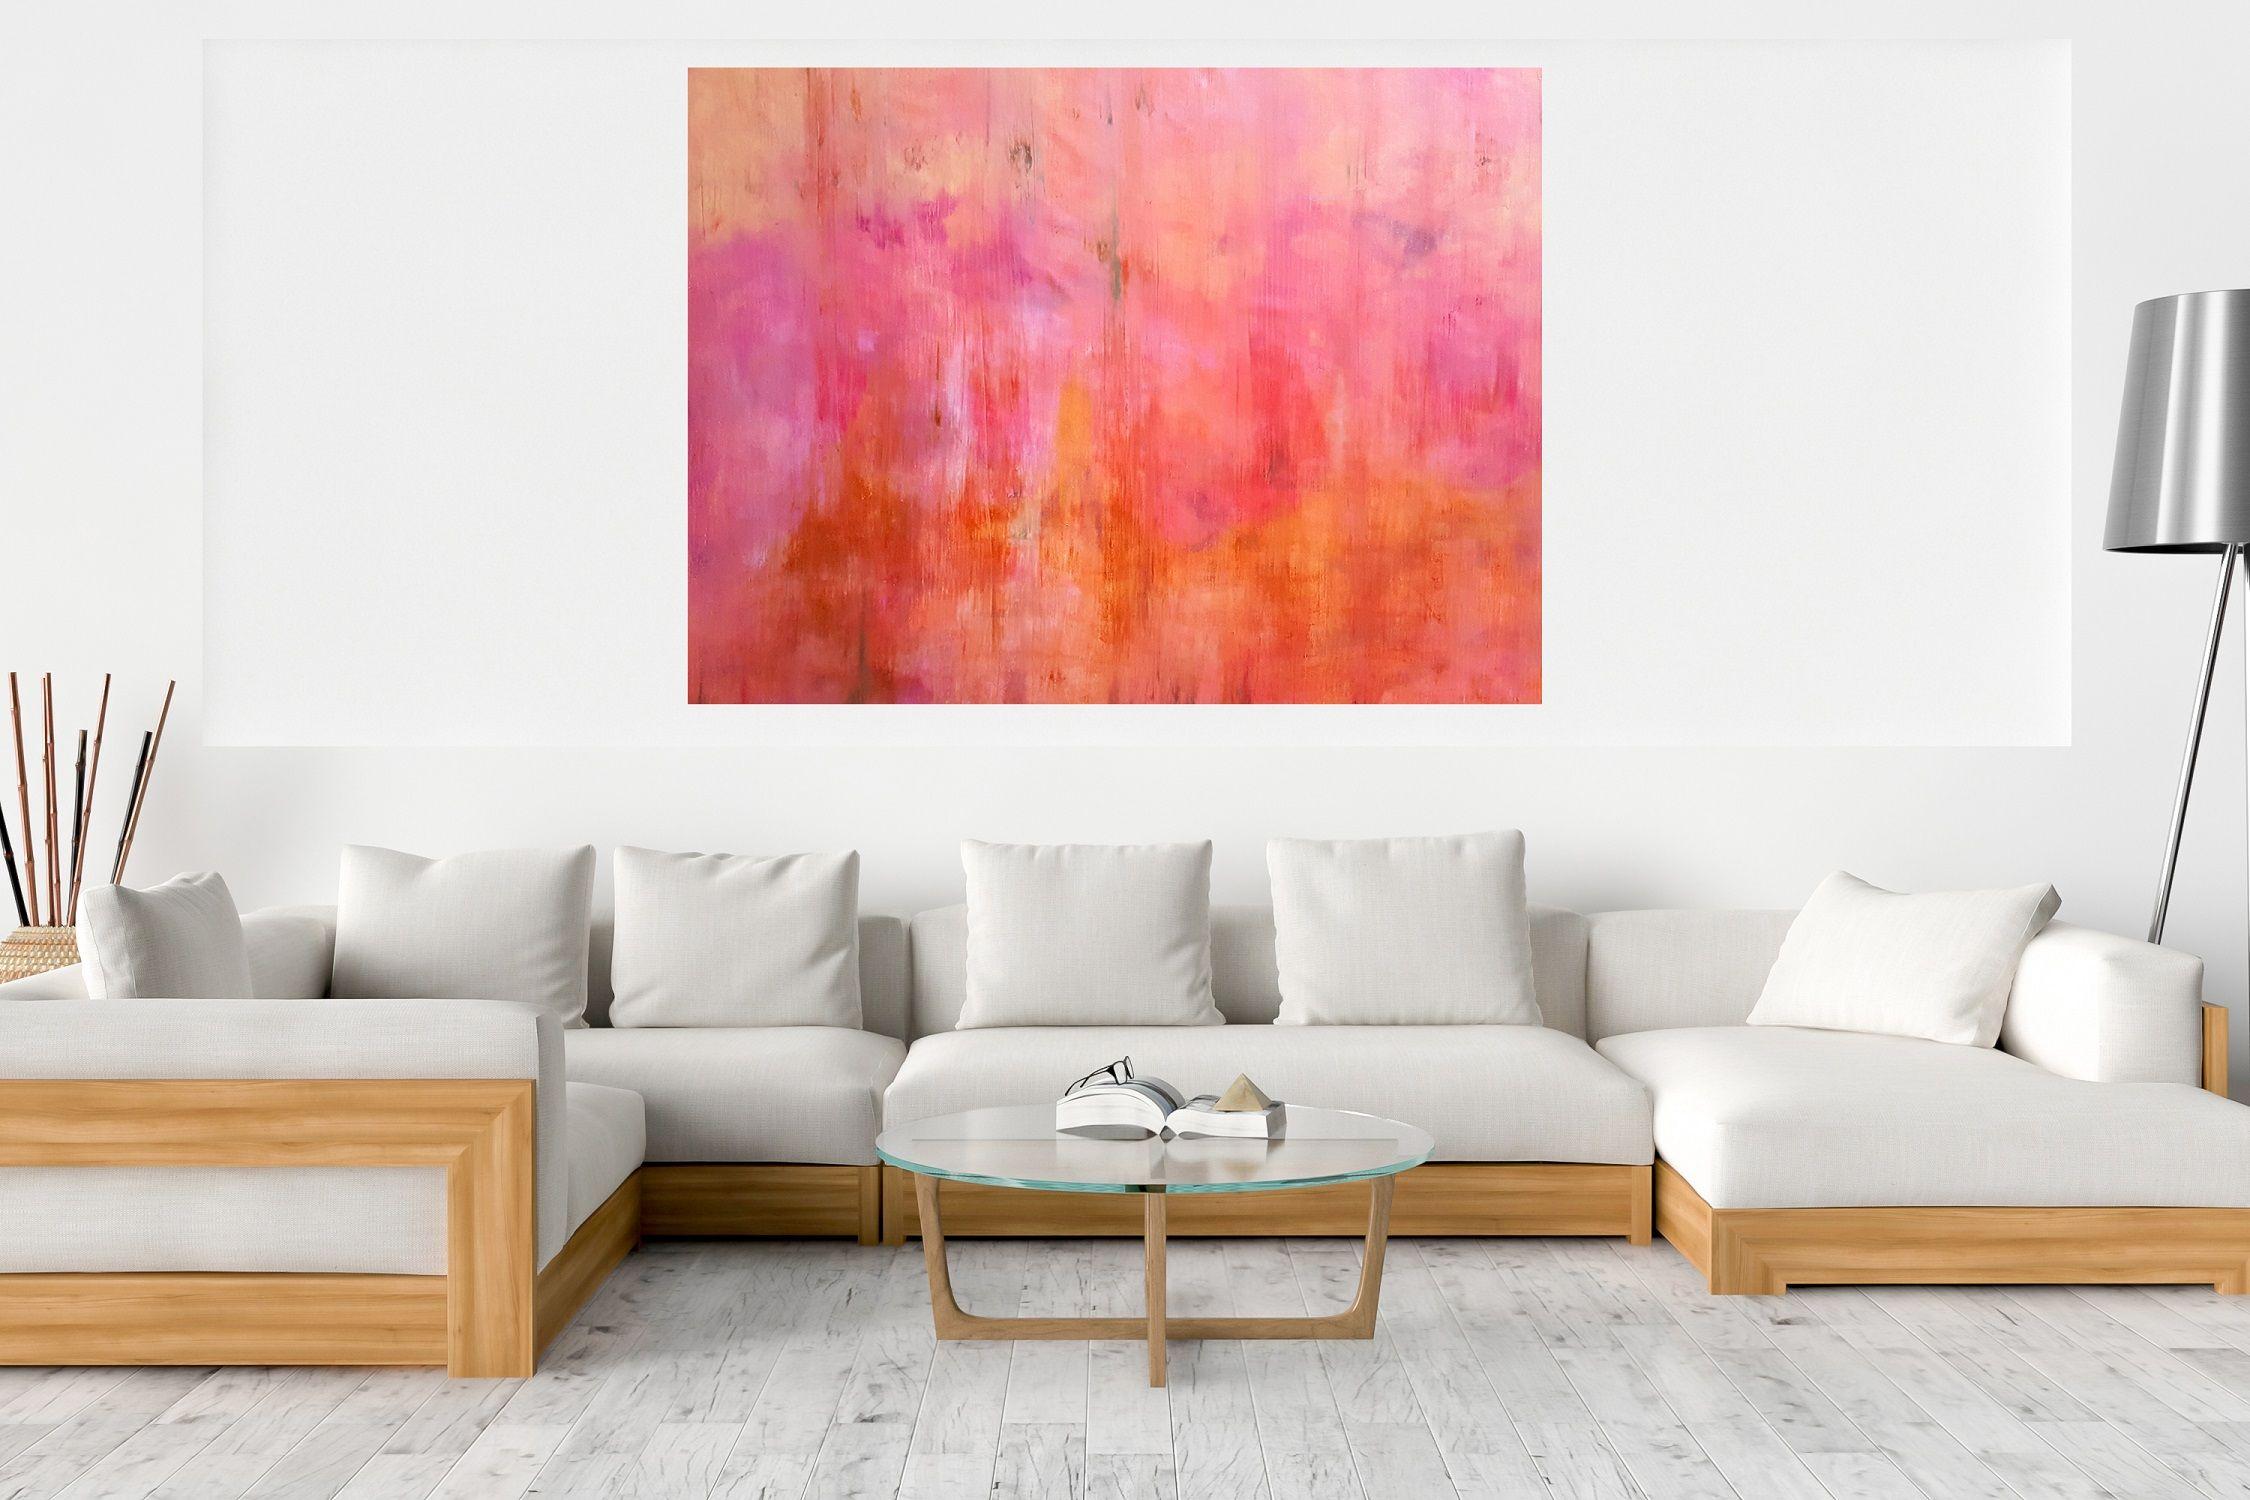 In the pink fog - XXL abstract, Painting, Acrylic on Canvas 2